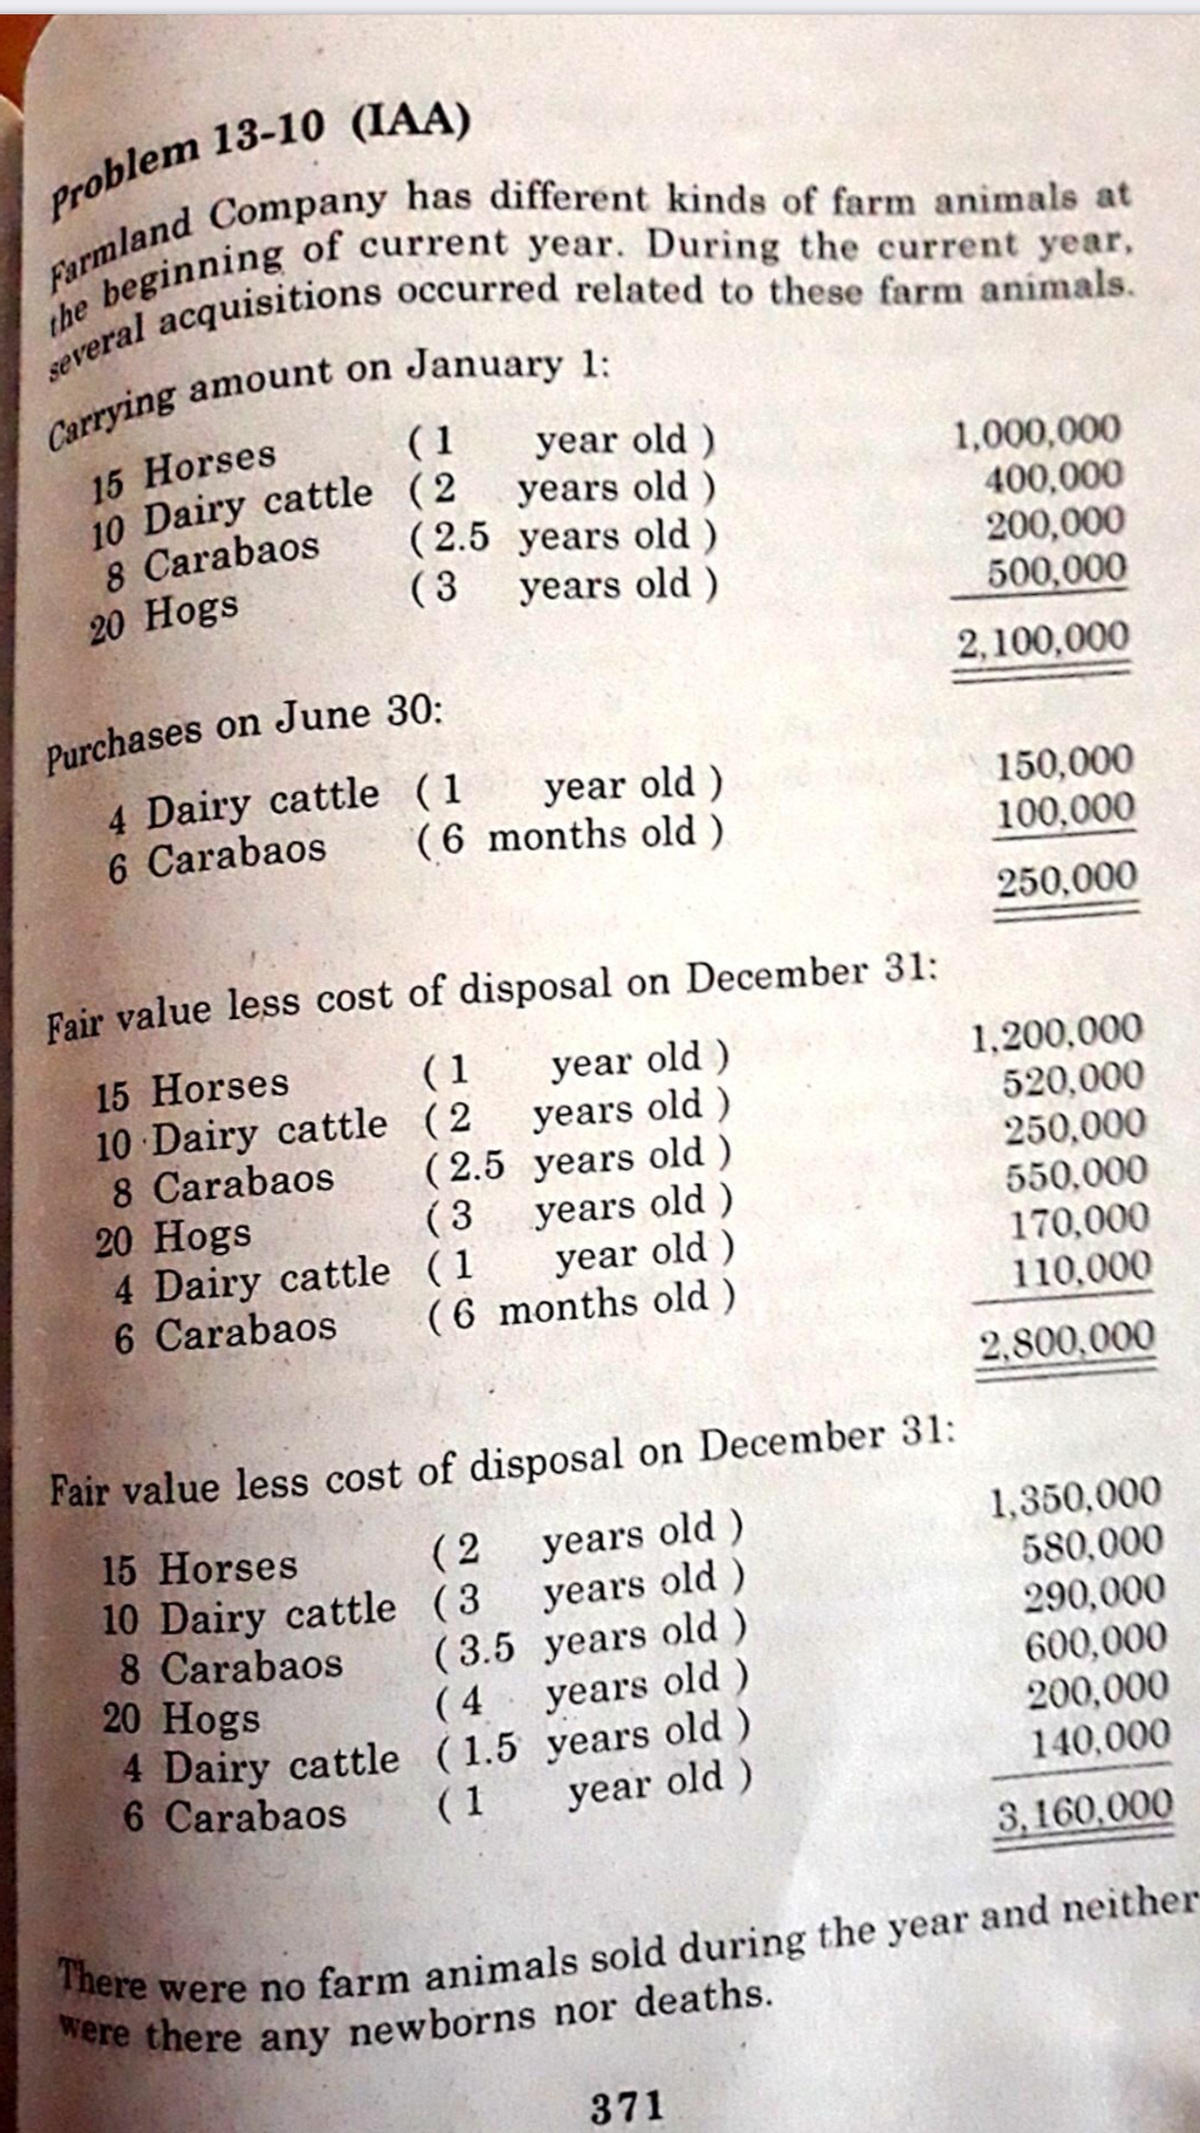 15 Horses
10 Dairy cattle (2
8 Carabaos
20 Hogs
(1
year old )
years old)
( 2.5 years old )
1,000,000
400,000
200,000
500,000
( 3
years old)
2,100,000
Purchases on June 30:
4 Dairy cattle (1
6 Carabaos
year old )
( 6 months old)
150,000
100,000
250,000
Fair value less cost of disposal on December 31:
15 Horses
10 Dairy cattle (2
8 Carabaos
20 Hogs
4 Dairy cattle (1
6 Carabaos
( 1
years old )
( 2.5 years old )
( 3
year old )
1,200,000
520,000
250,000
550,000
170,000
110,000
years old )
year old )
(6 months old )
2,800,000
Fair value less cost of disposal on December 31:
15 Horses
10 Dairy cattle (3
8 Carabaos
20 Hogs
4 Dairy cattle (1.5 years old )
6 Carabaos
( 2
years old)
( 3.5 years old)
( 4
1,350,000
580,000
290,000
600,000
200,000
140,000
years old)
years old)
( 1
year old )
3,160,000
were no farm animals sold during the year and neither
There
ere there any newborns nor deaths.
371
